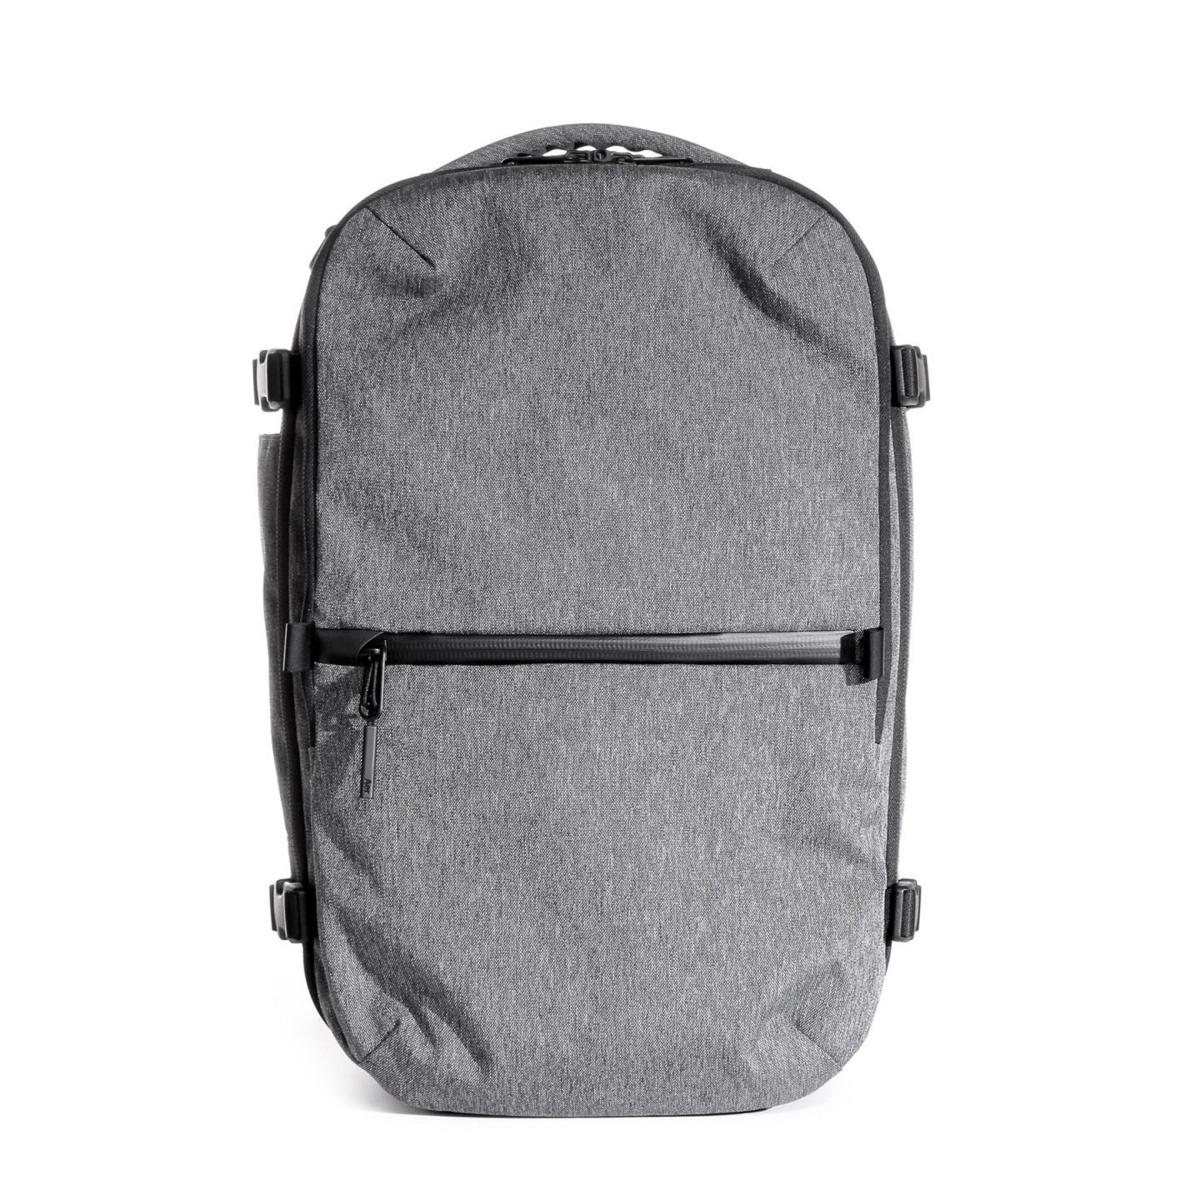 Aer: Perfect Minimalist Bags for Travel, Work, and the Gym | Travel ...